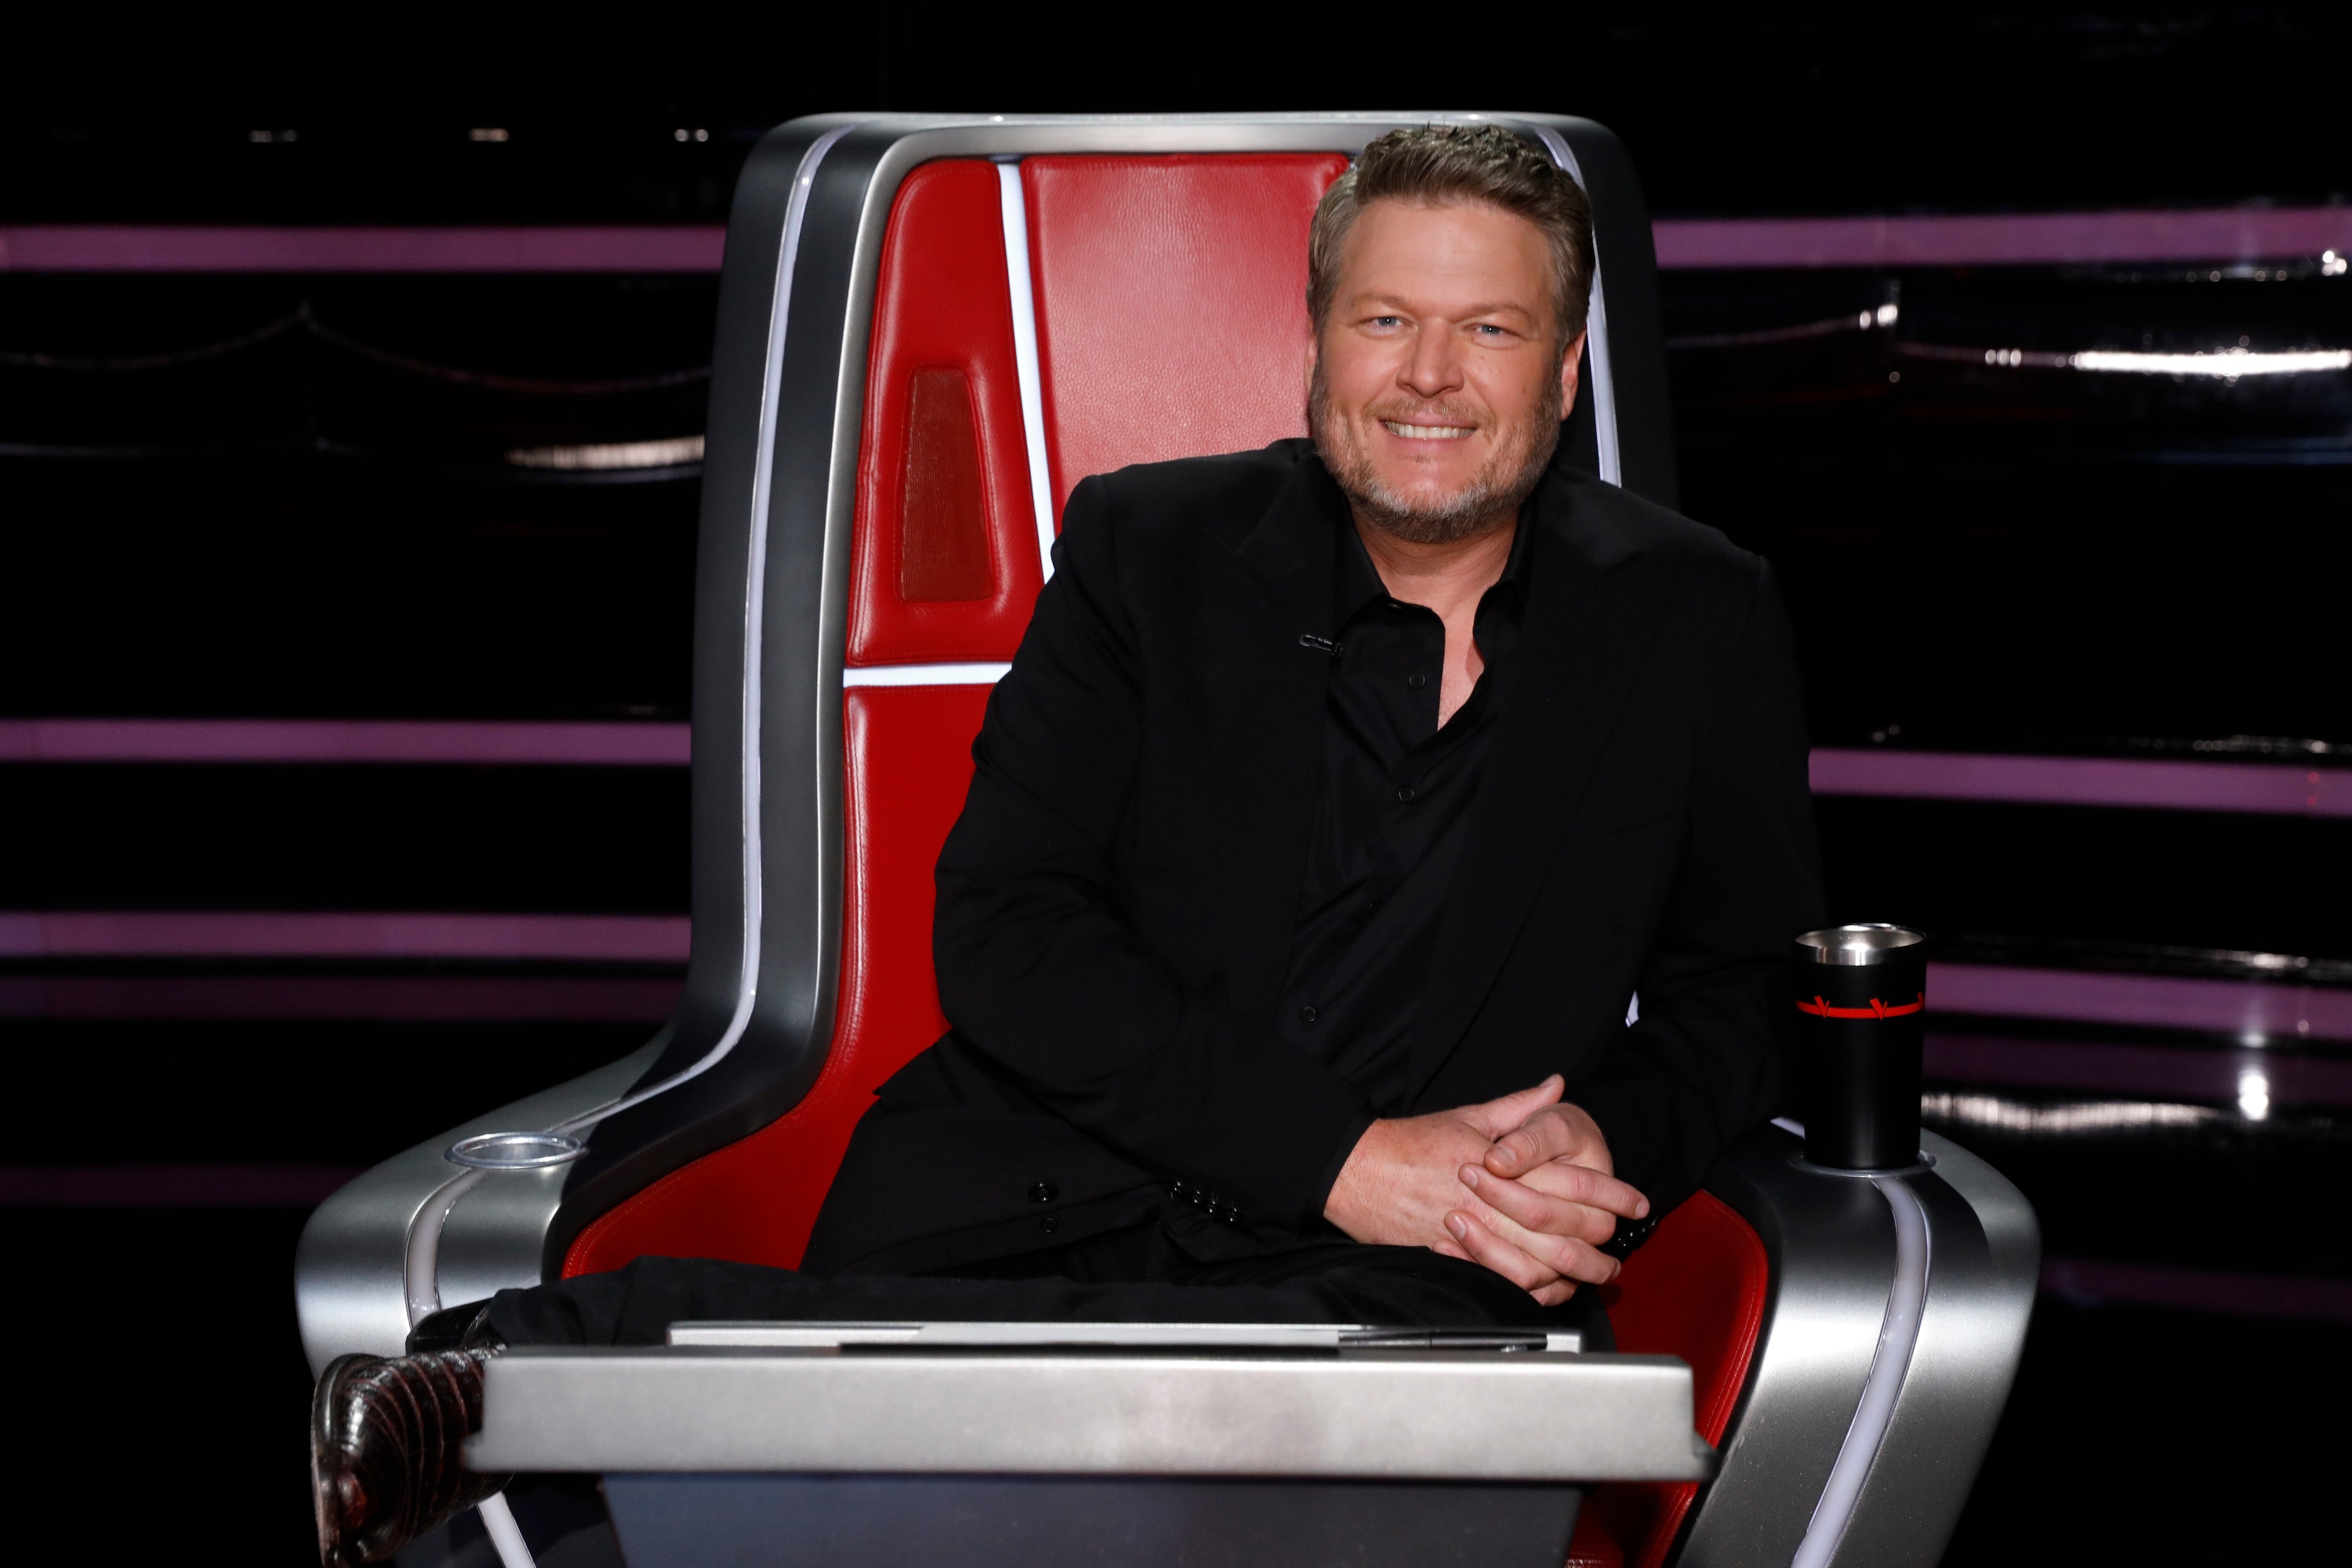 Blake Shelton exits 'The Voice,' Niall Horan dishes on working with 'champion' country star